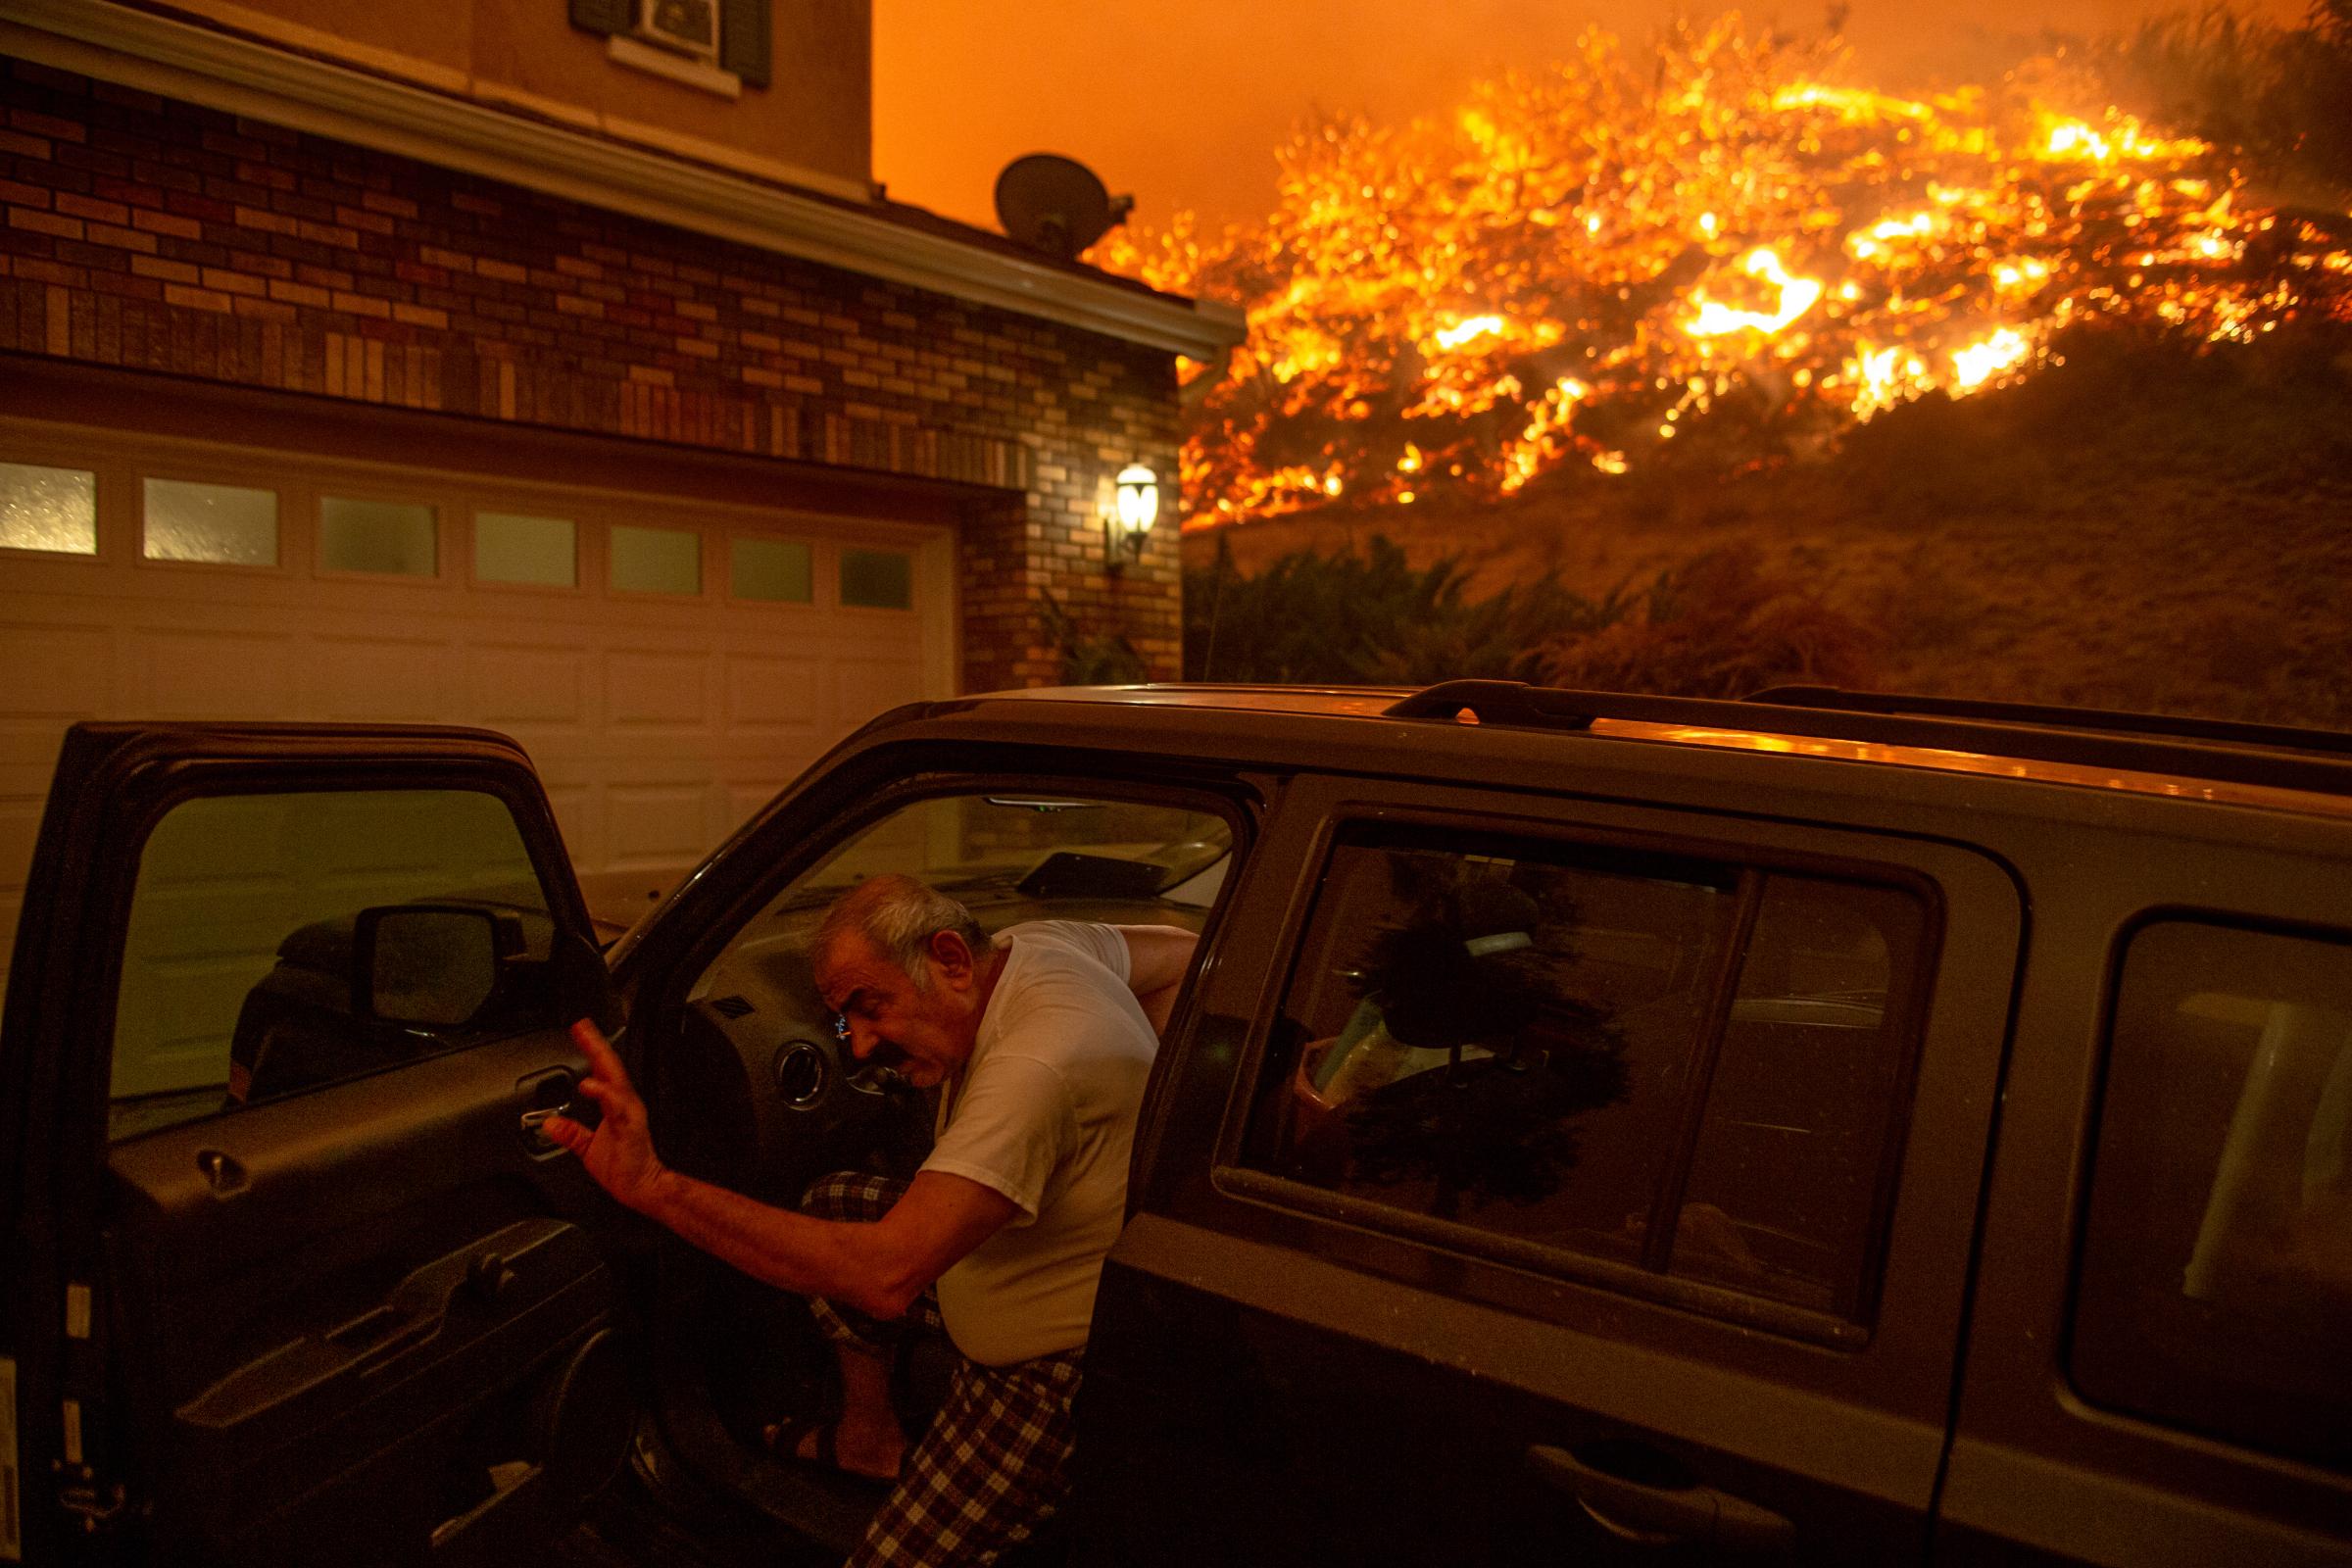 ON ASSIGNMENT - The state of California faced its worst fire season in...